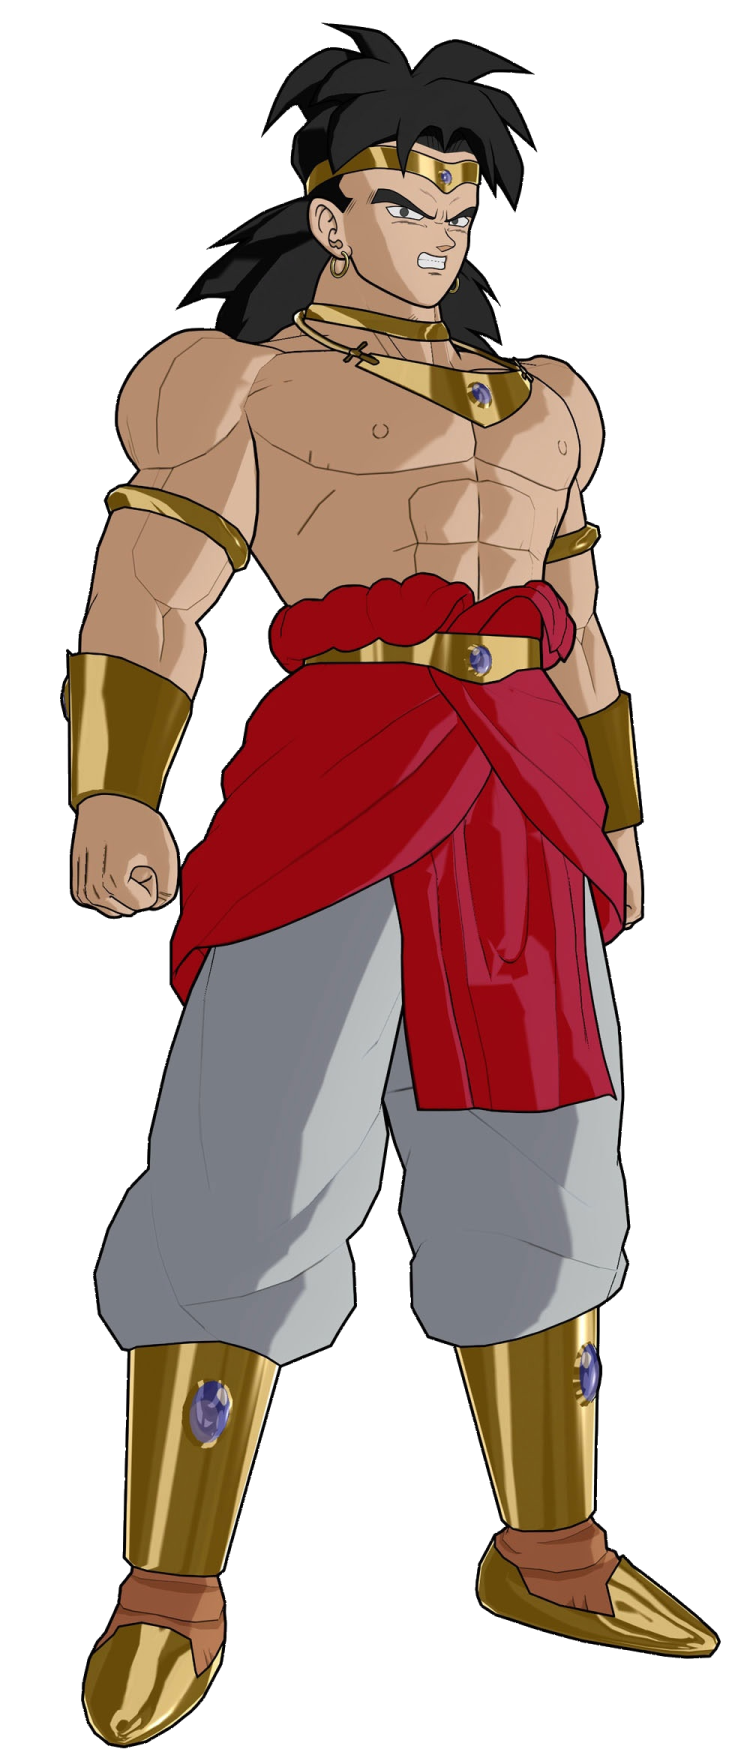 image-base-broly-png-the-lookout-fandom-powered-by-wikia